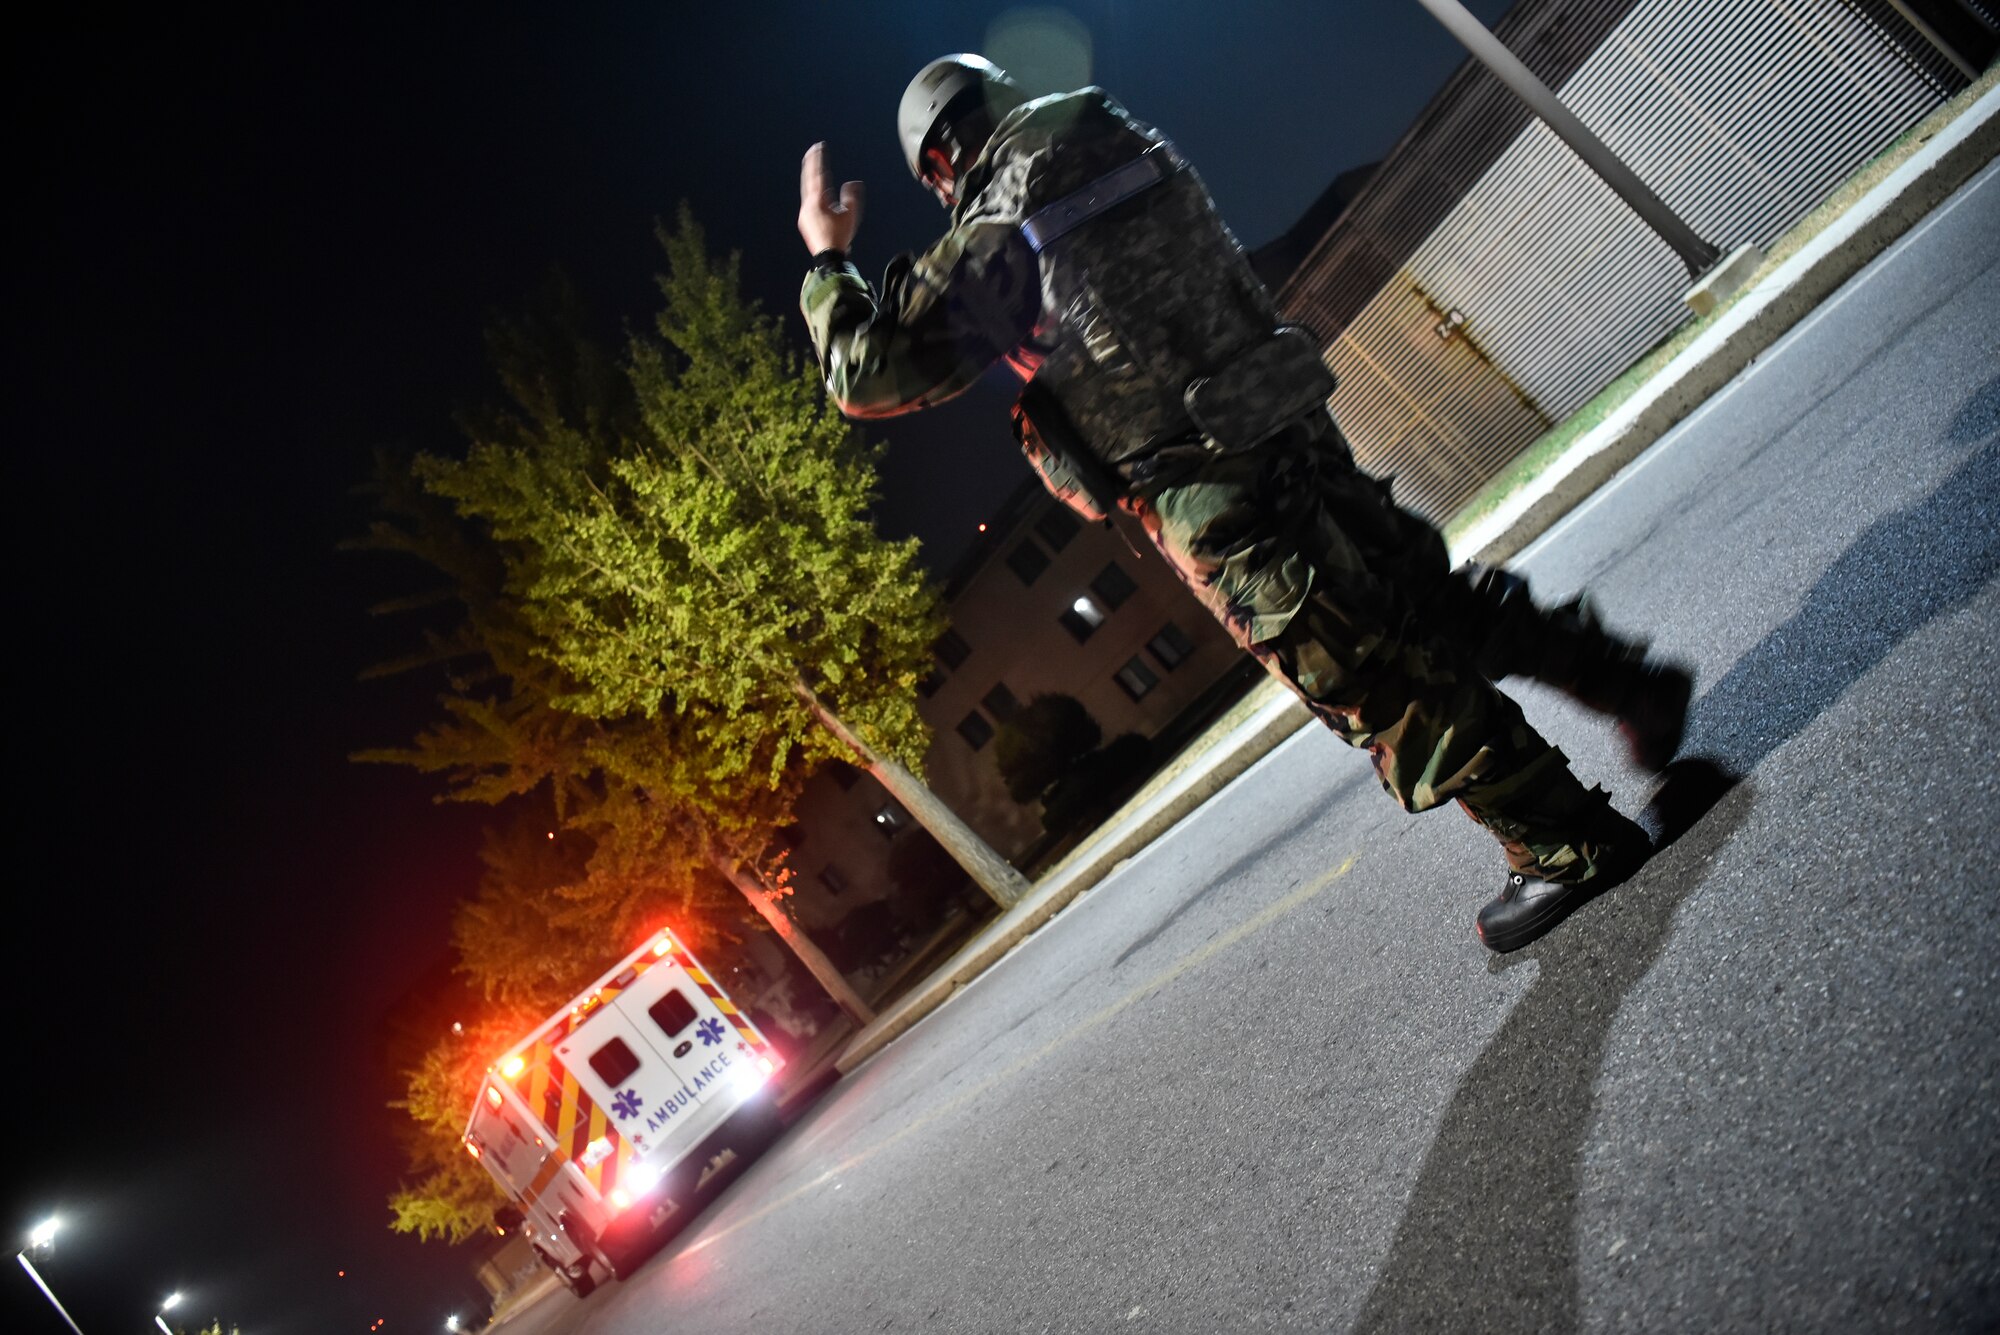 An Airman assists an ambulance leaving a training event.